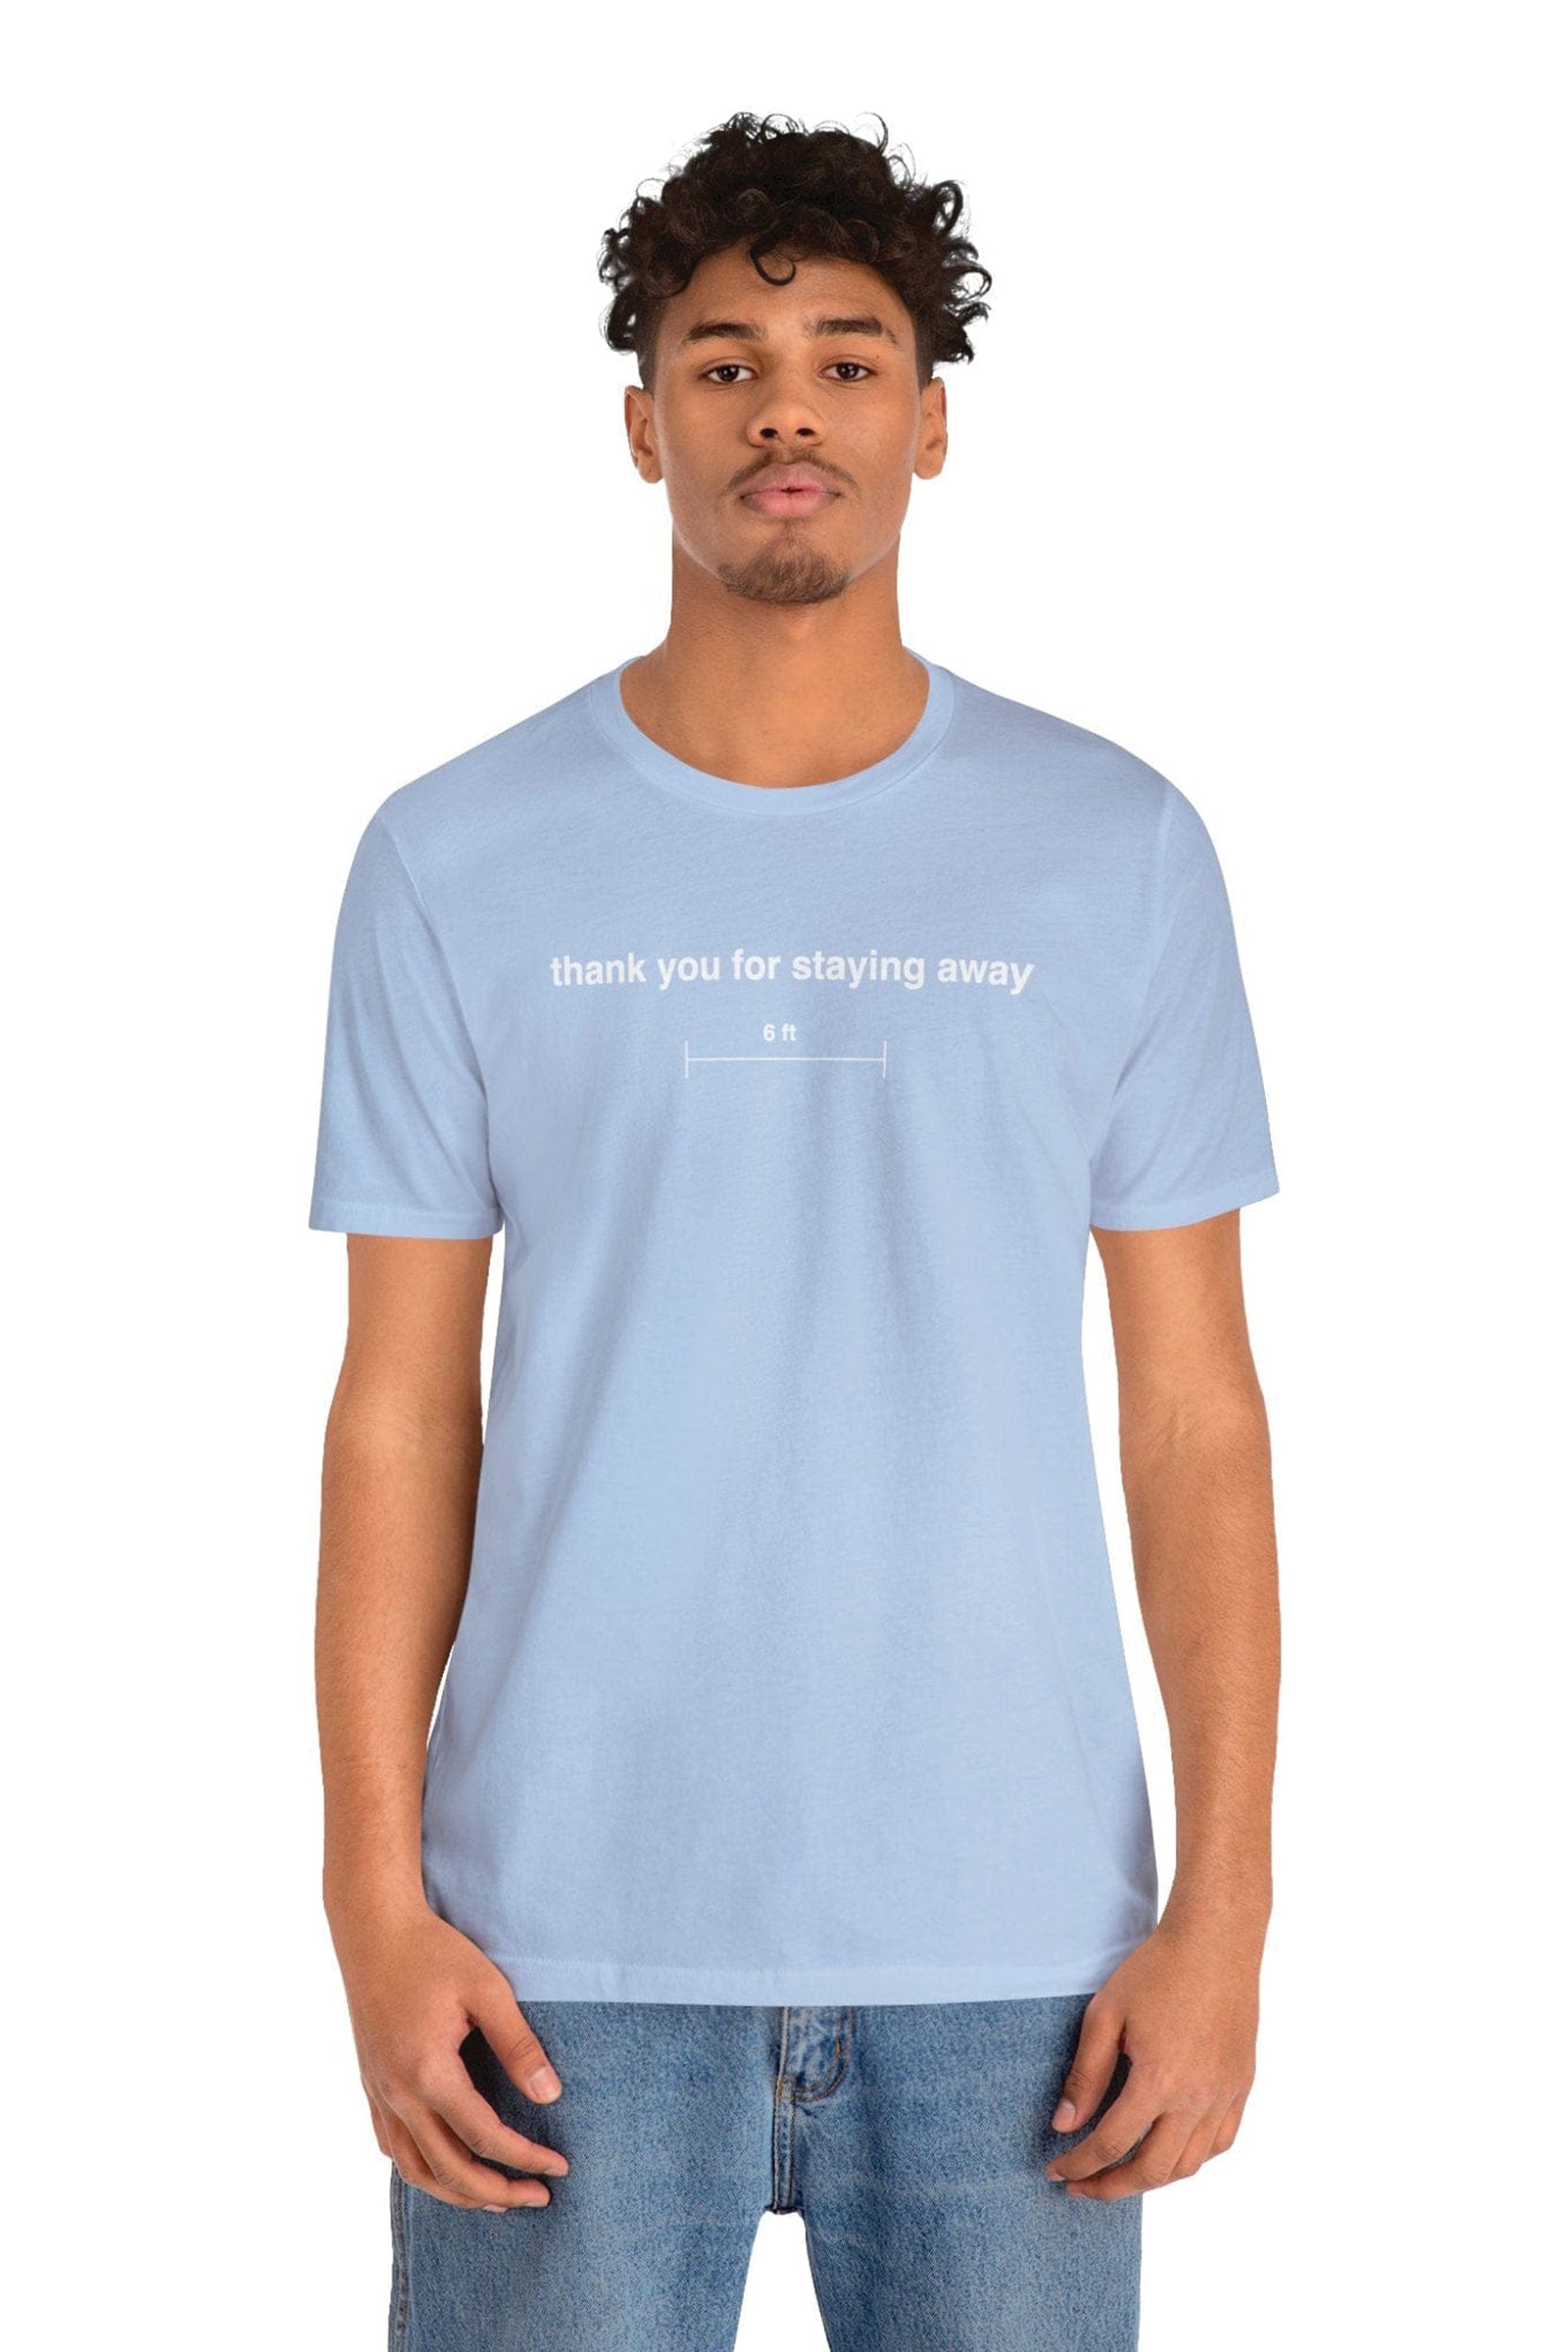 "thank you for staying away" T-Shirt